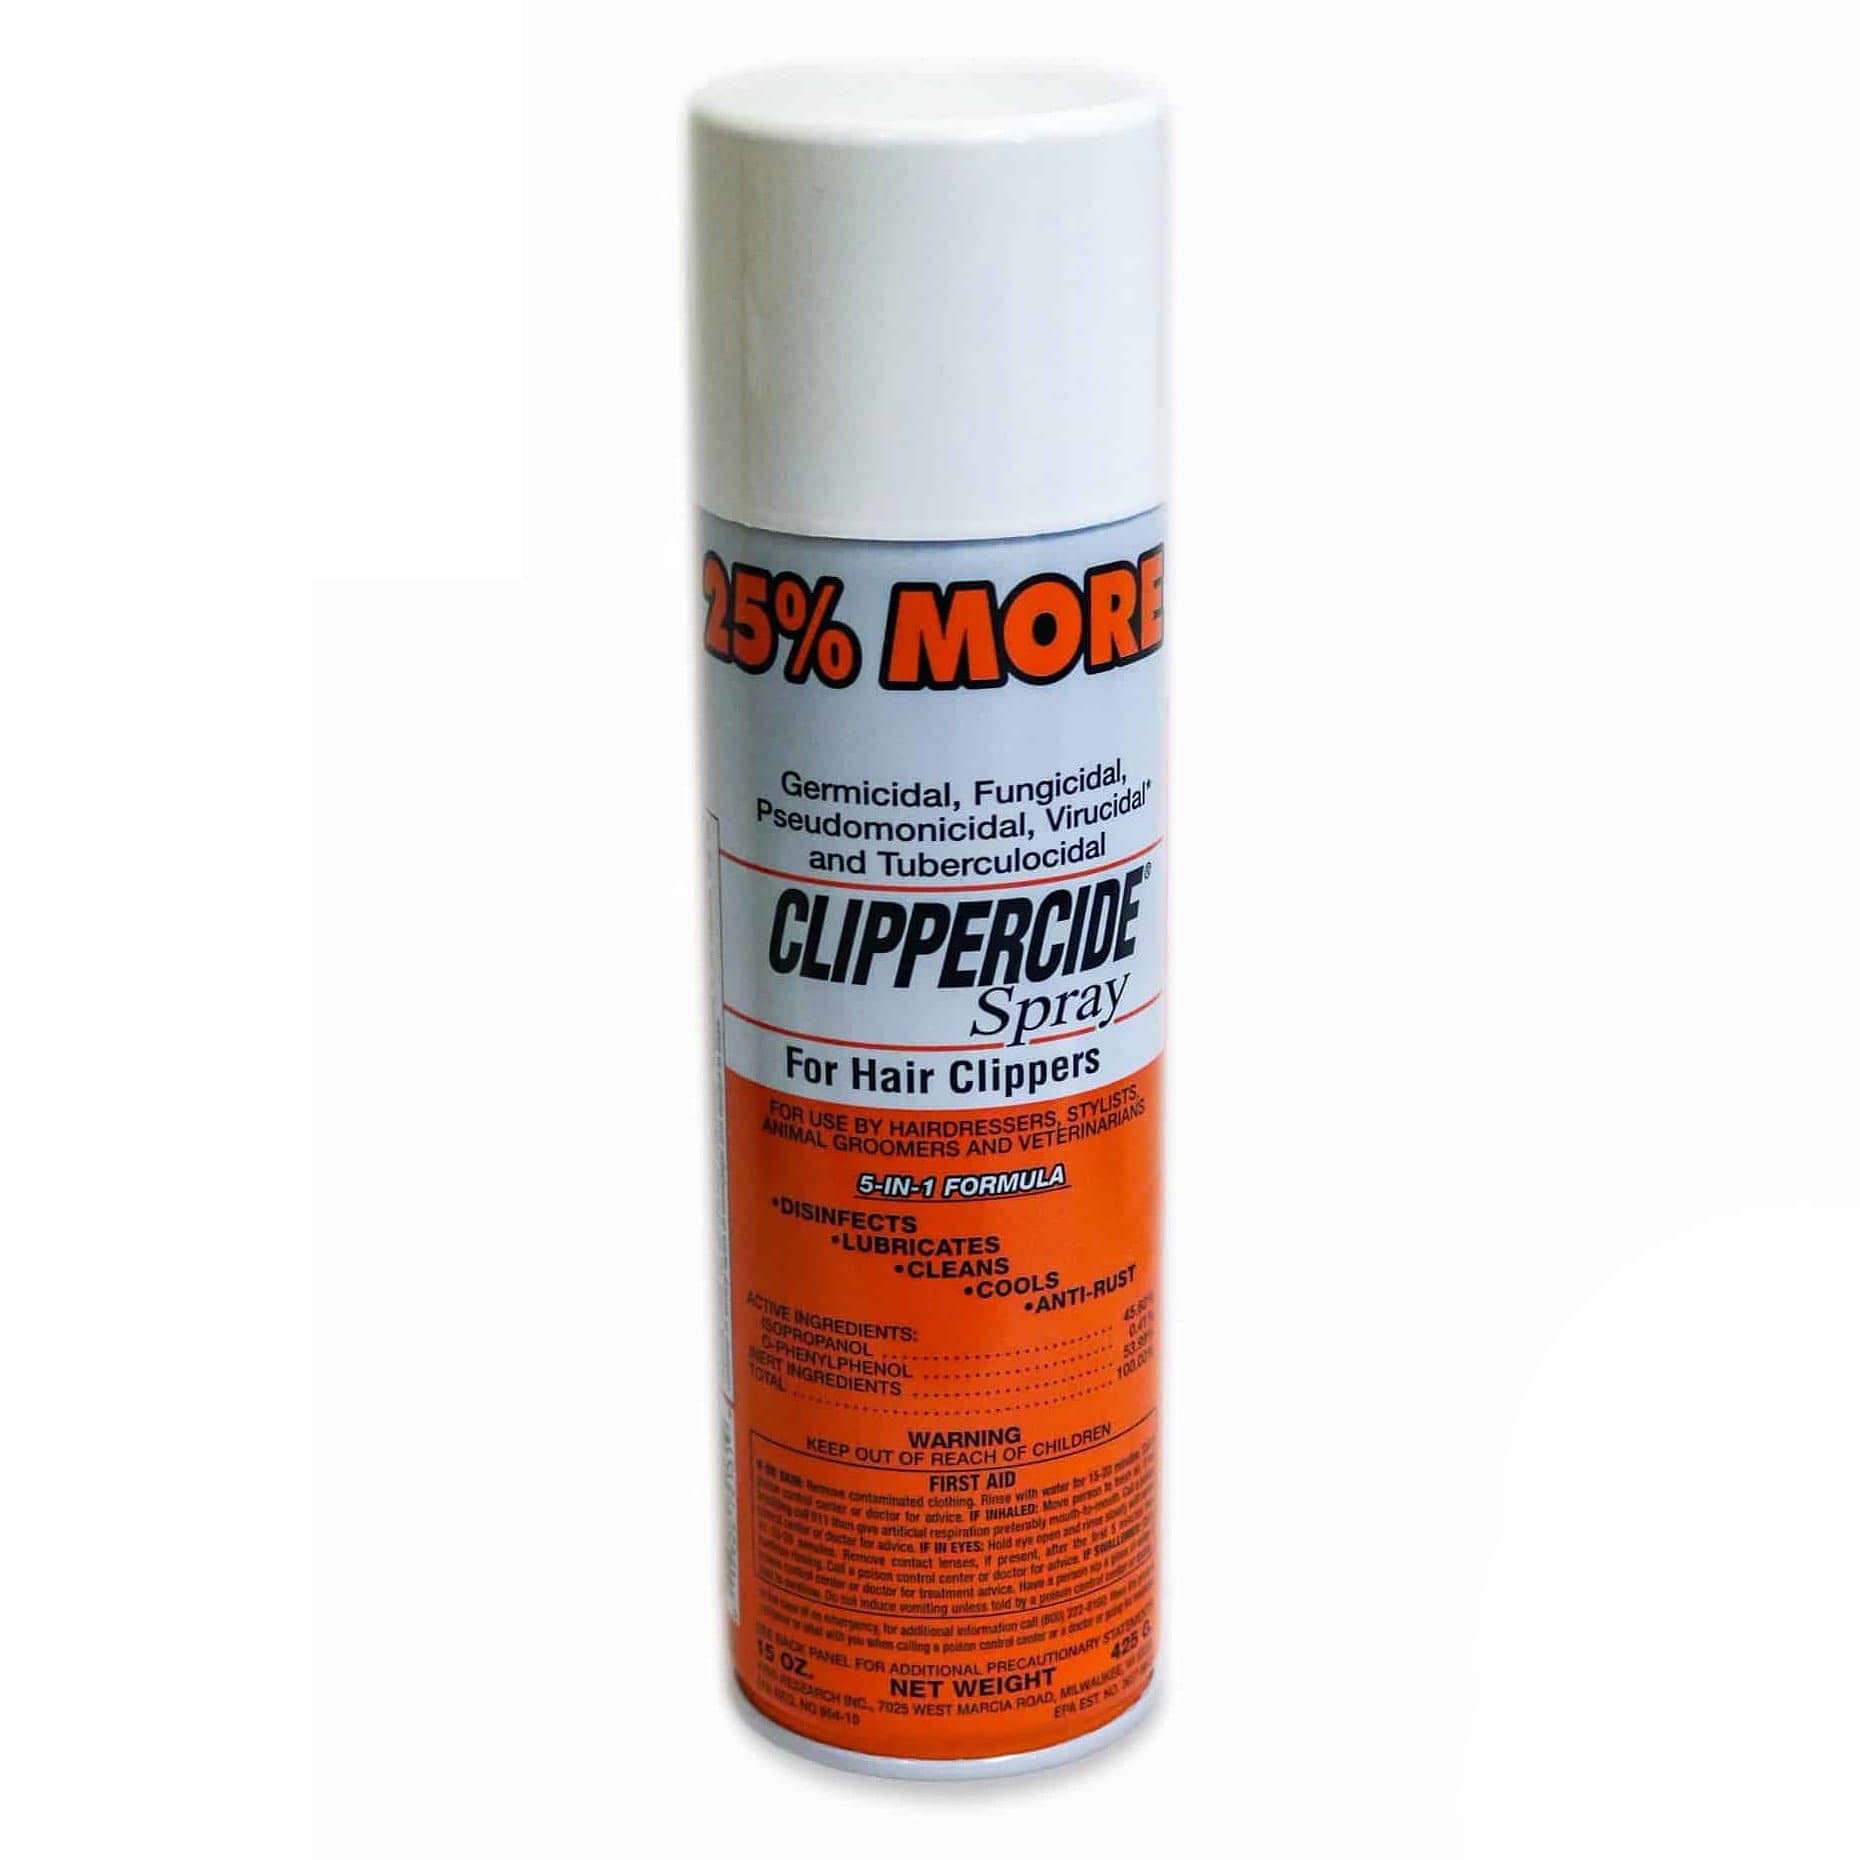 Clippercide Spray for Hair Clippers 15 oz. - Goldy TV